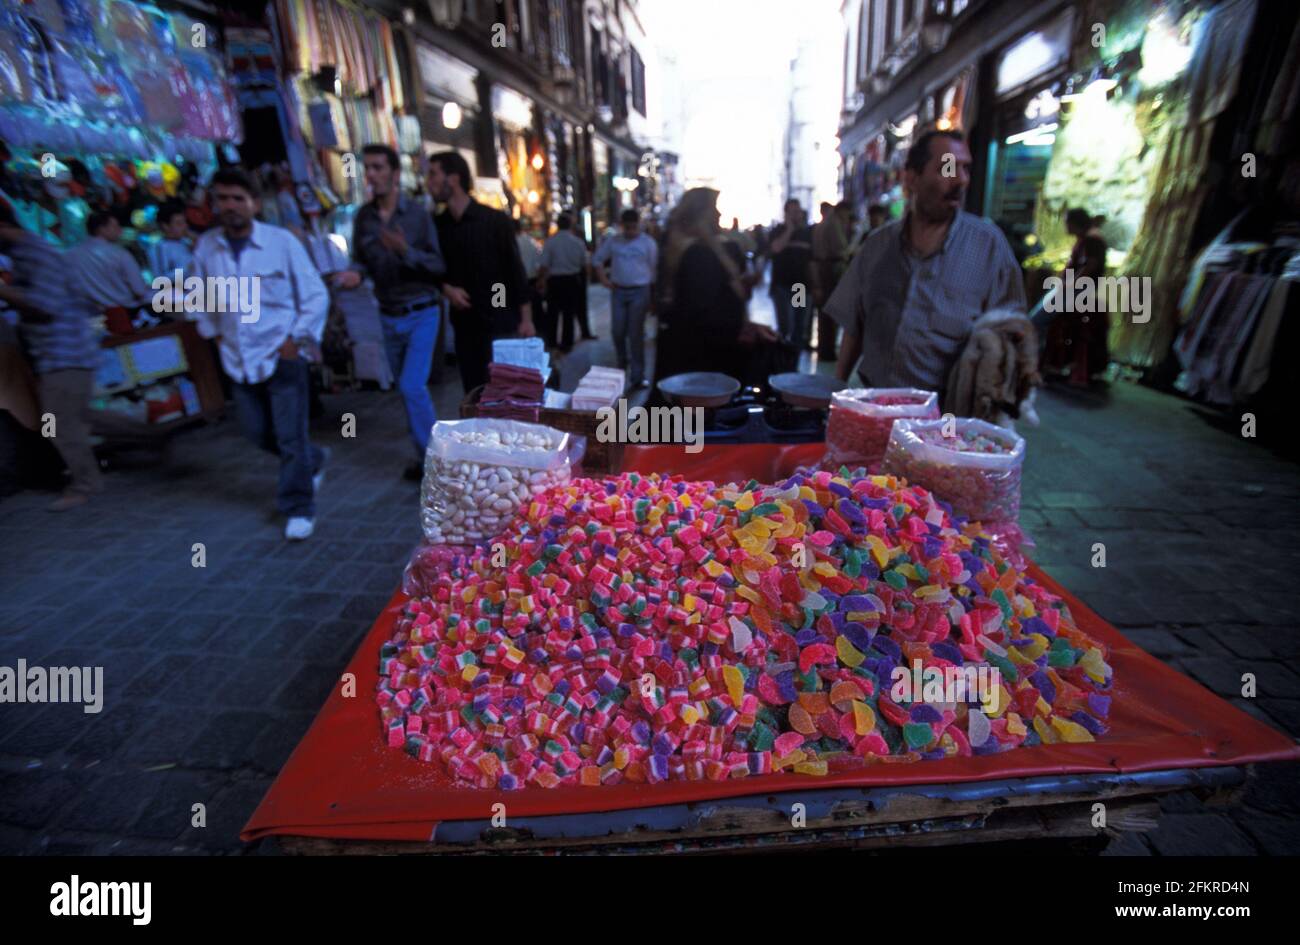 Stall with sweets in the Al-Hamidiyah Souq, Damascus, Syria Stock Photo